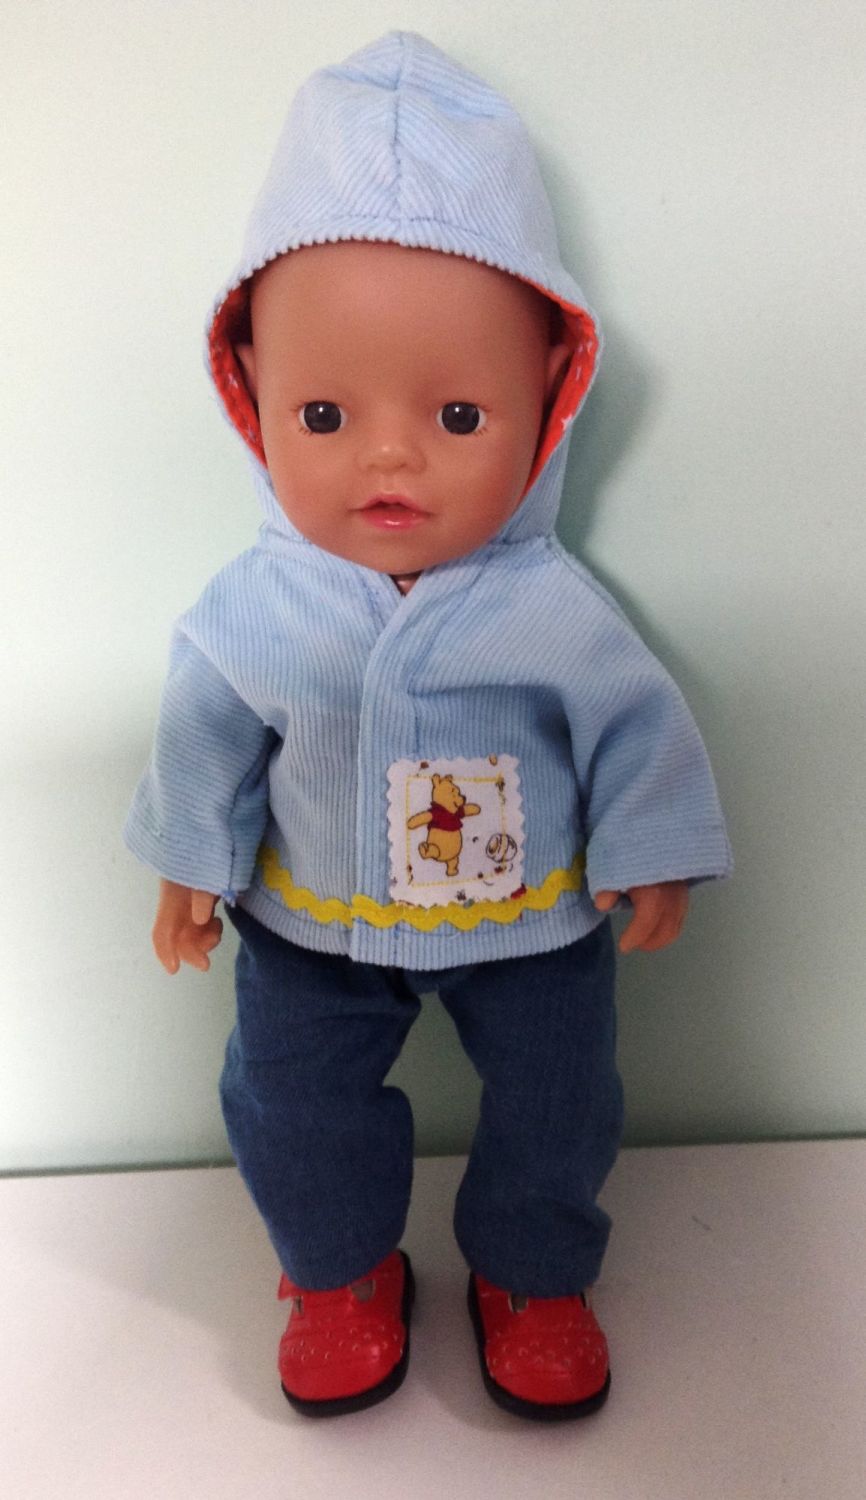 Doll's corduroy Jacket and jeans set made to fit a 12 inch high baby boy do